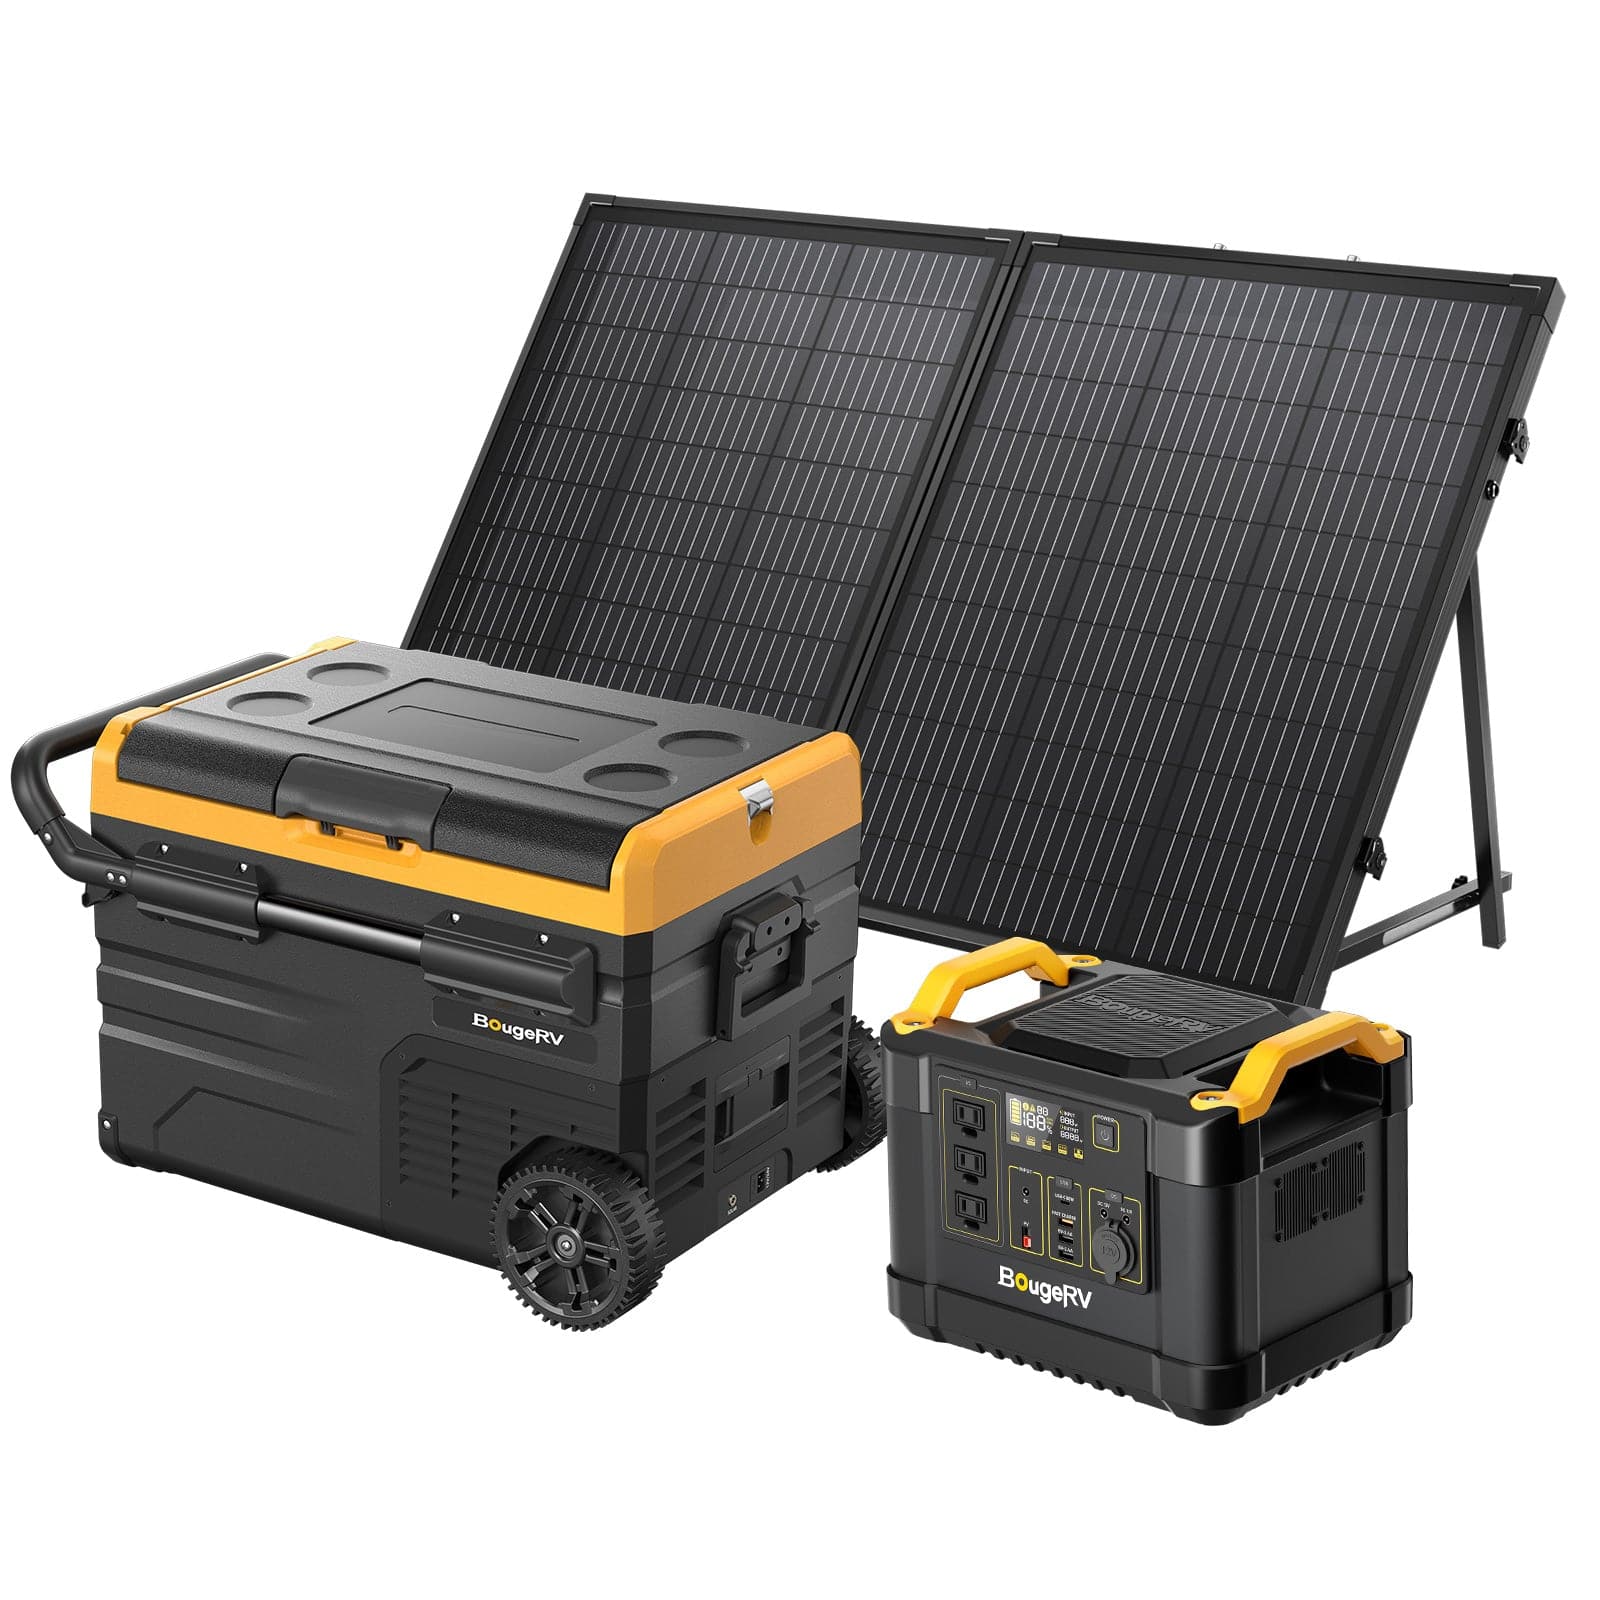 130W Portable Solar Kit for Outdoor Travel & Emergencies